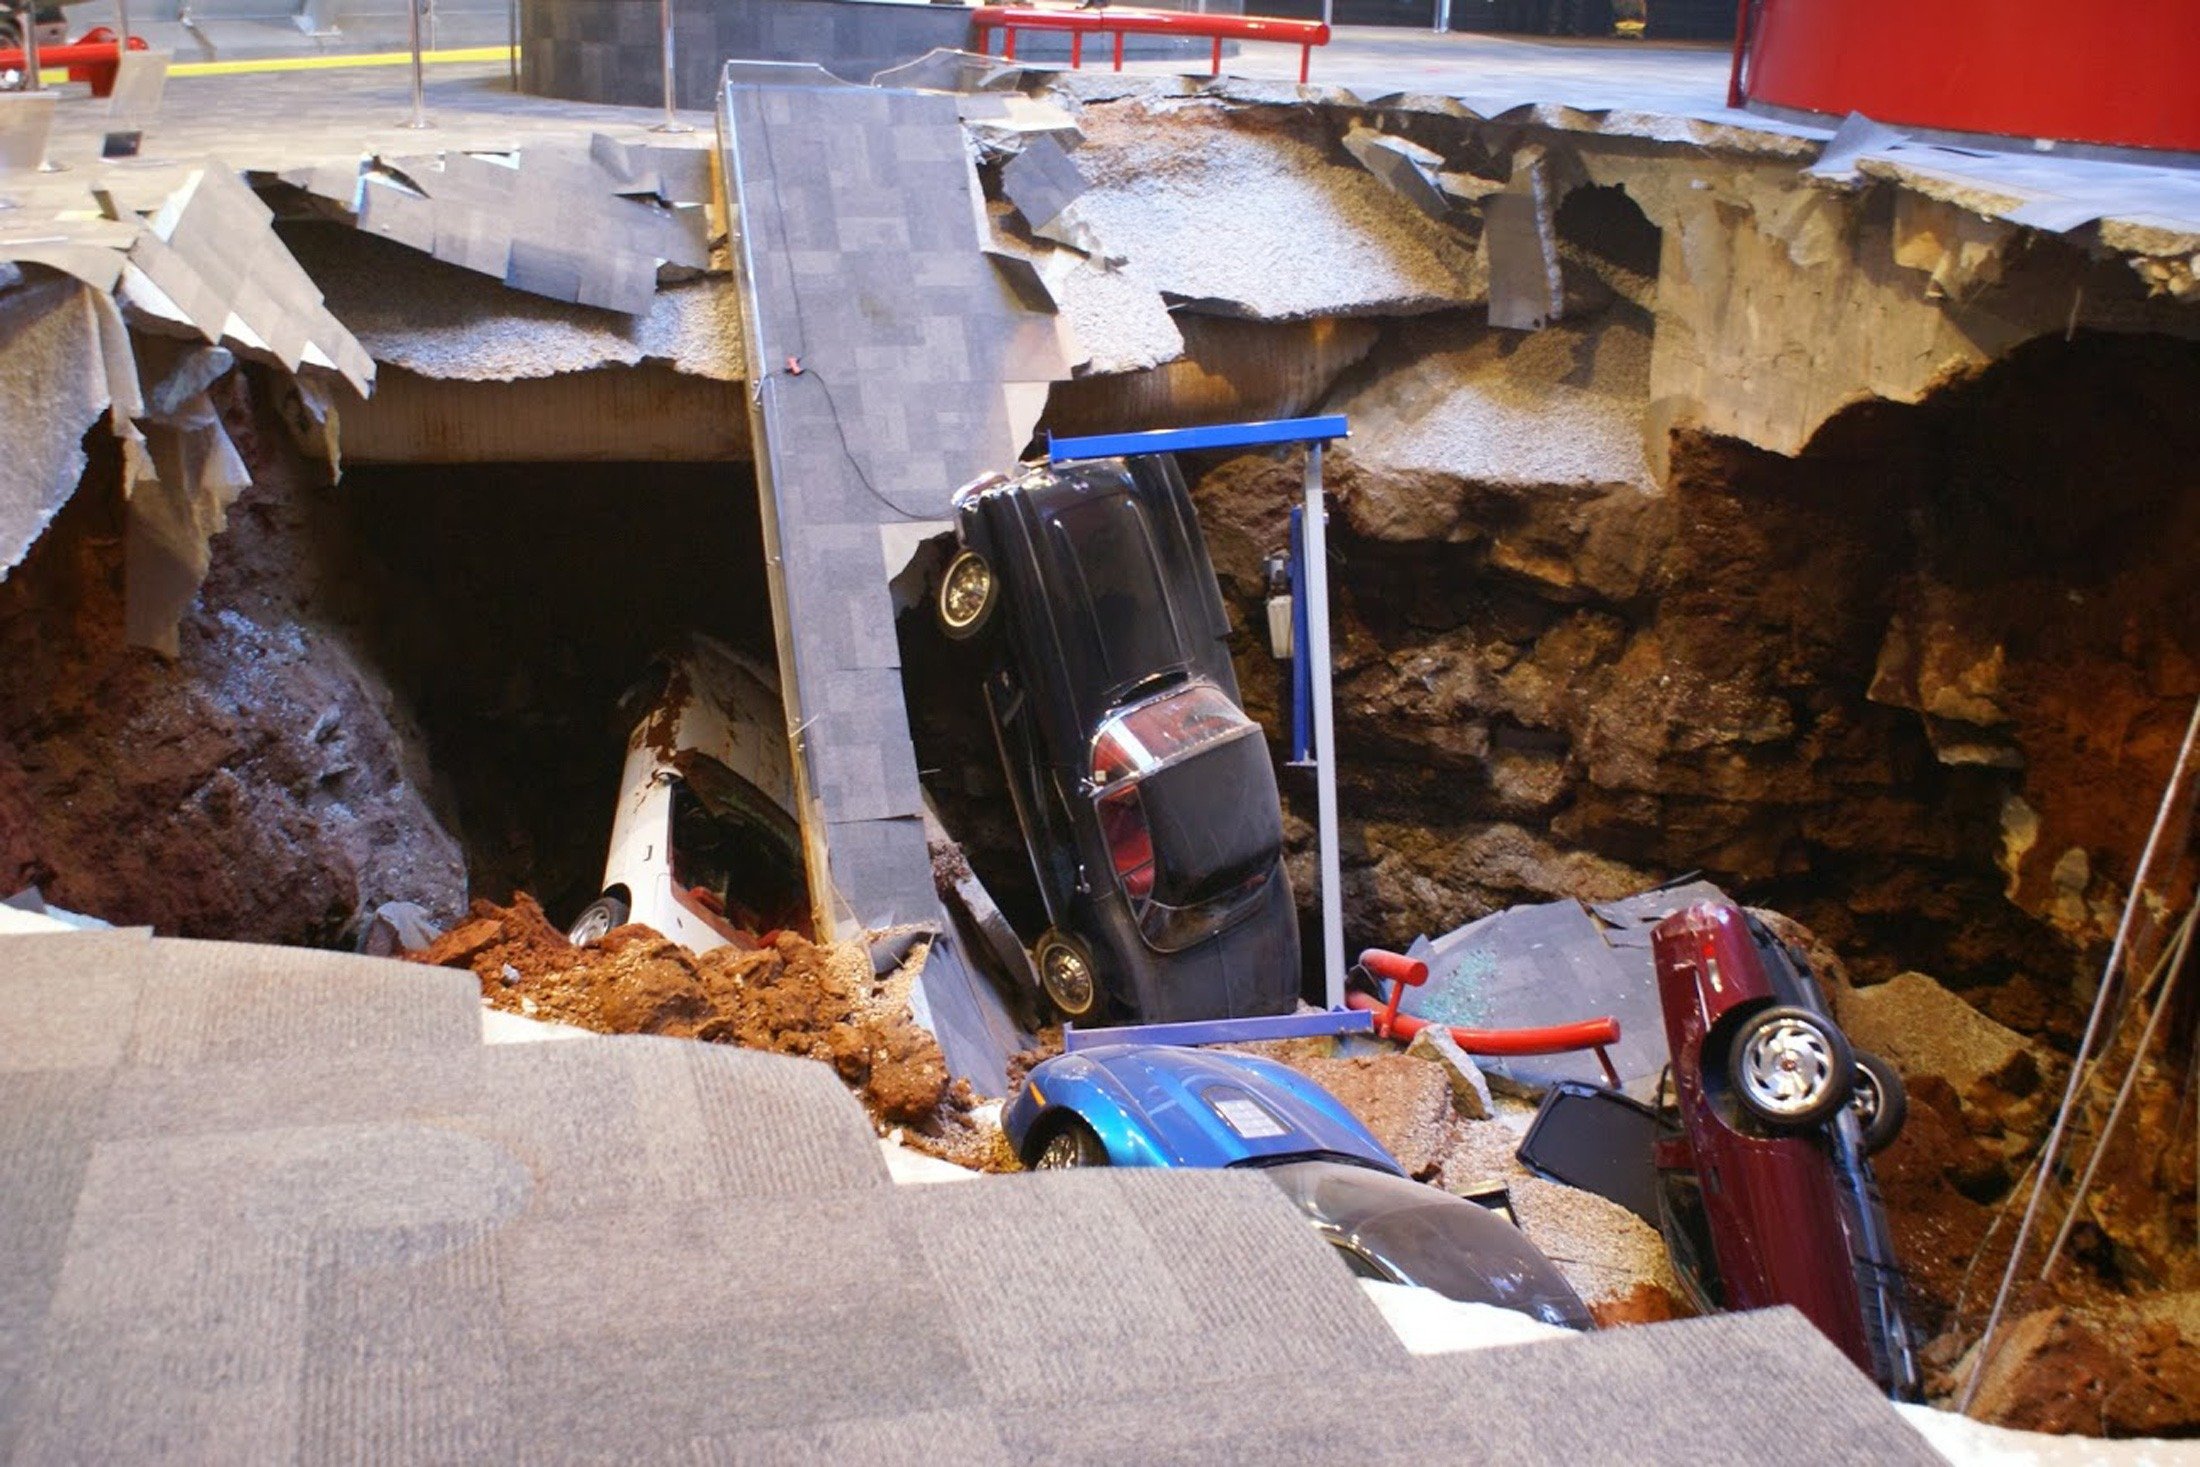 A 40-foot sinkhole opened up under the National Corvette Museum Feb. 12, 2014 and swallowed eight Corvettes, including the historic 1992 White 1 Millionth Corvette, in Bowling Green, Kentucky.